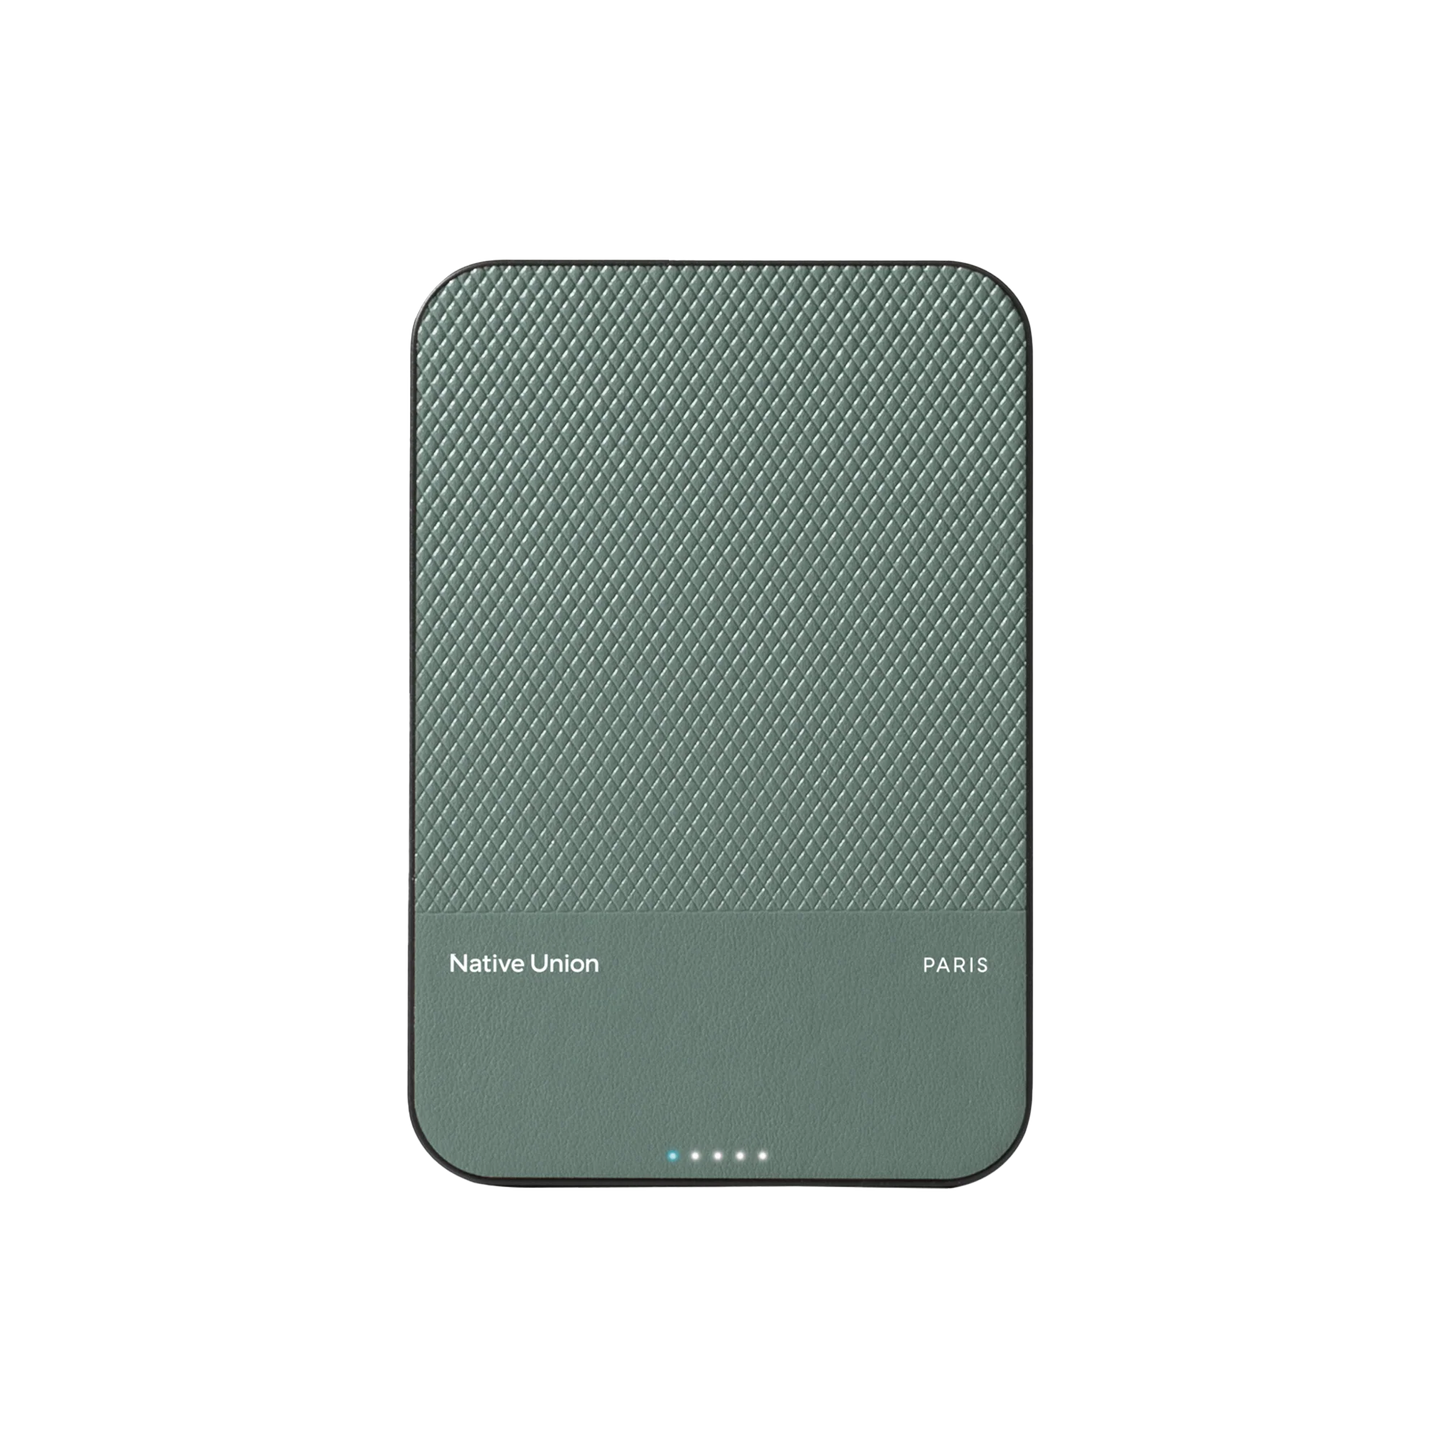 Native Union Re Classic Magnetic Power Bank 5000mAh